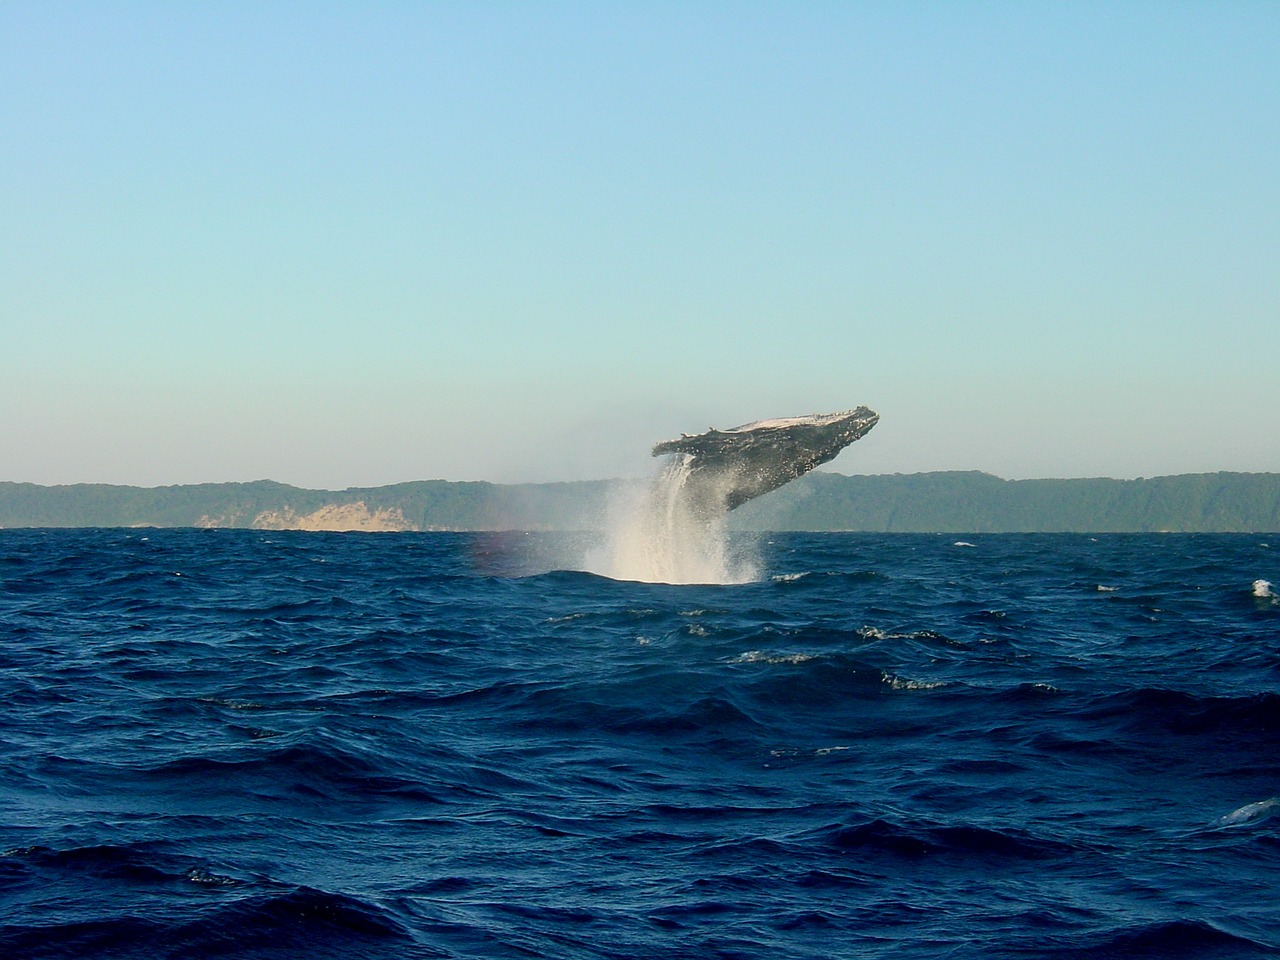 What Are The Best Places For Whale Watching In The Hawaii?